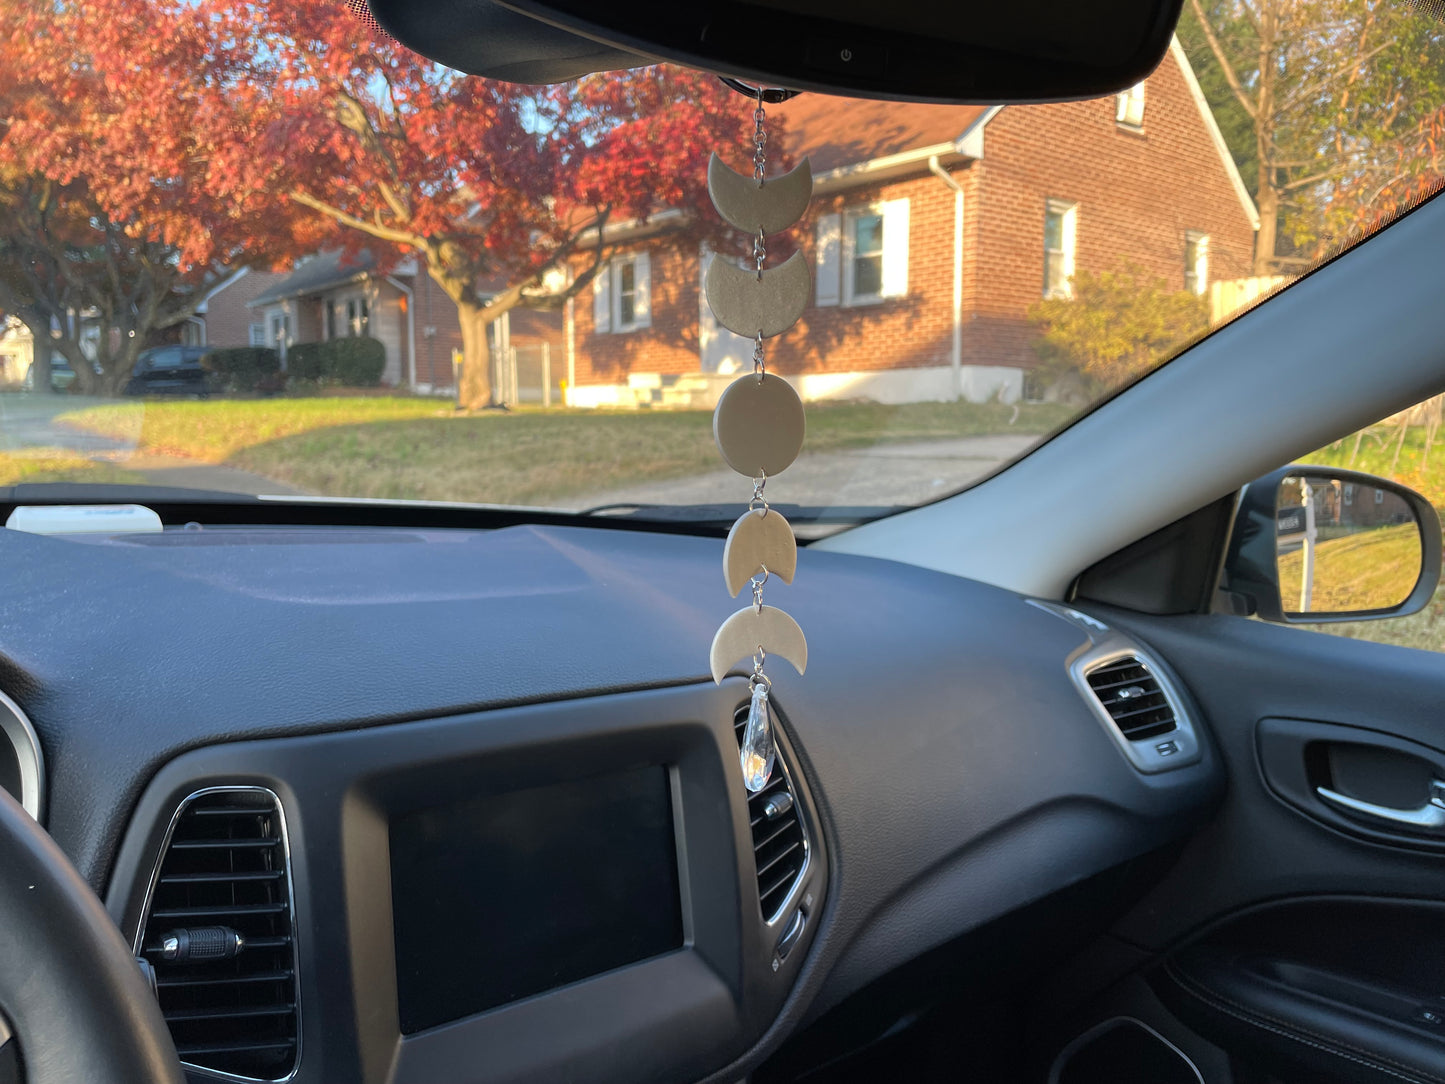 Moon Phase Rear View Mirror Hanger - One of a Kind